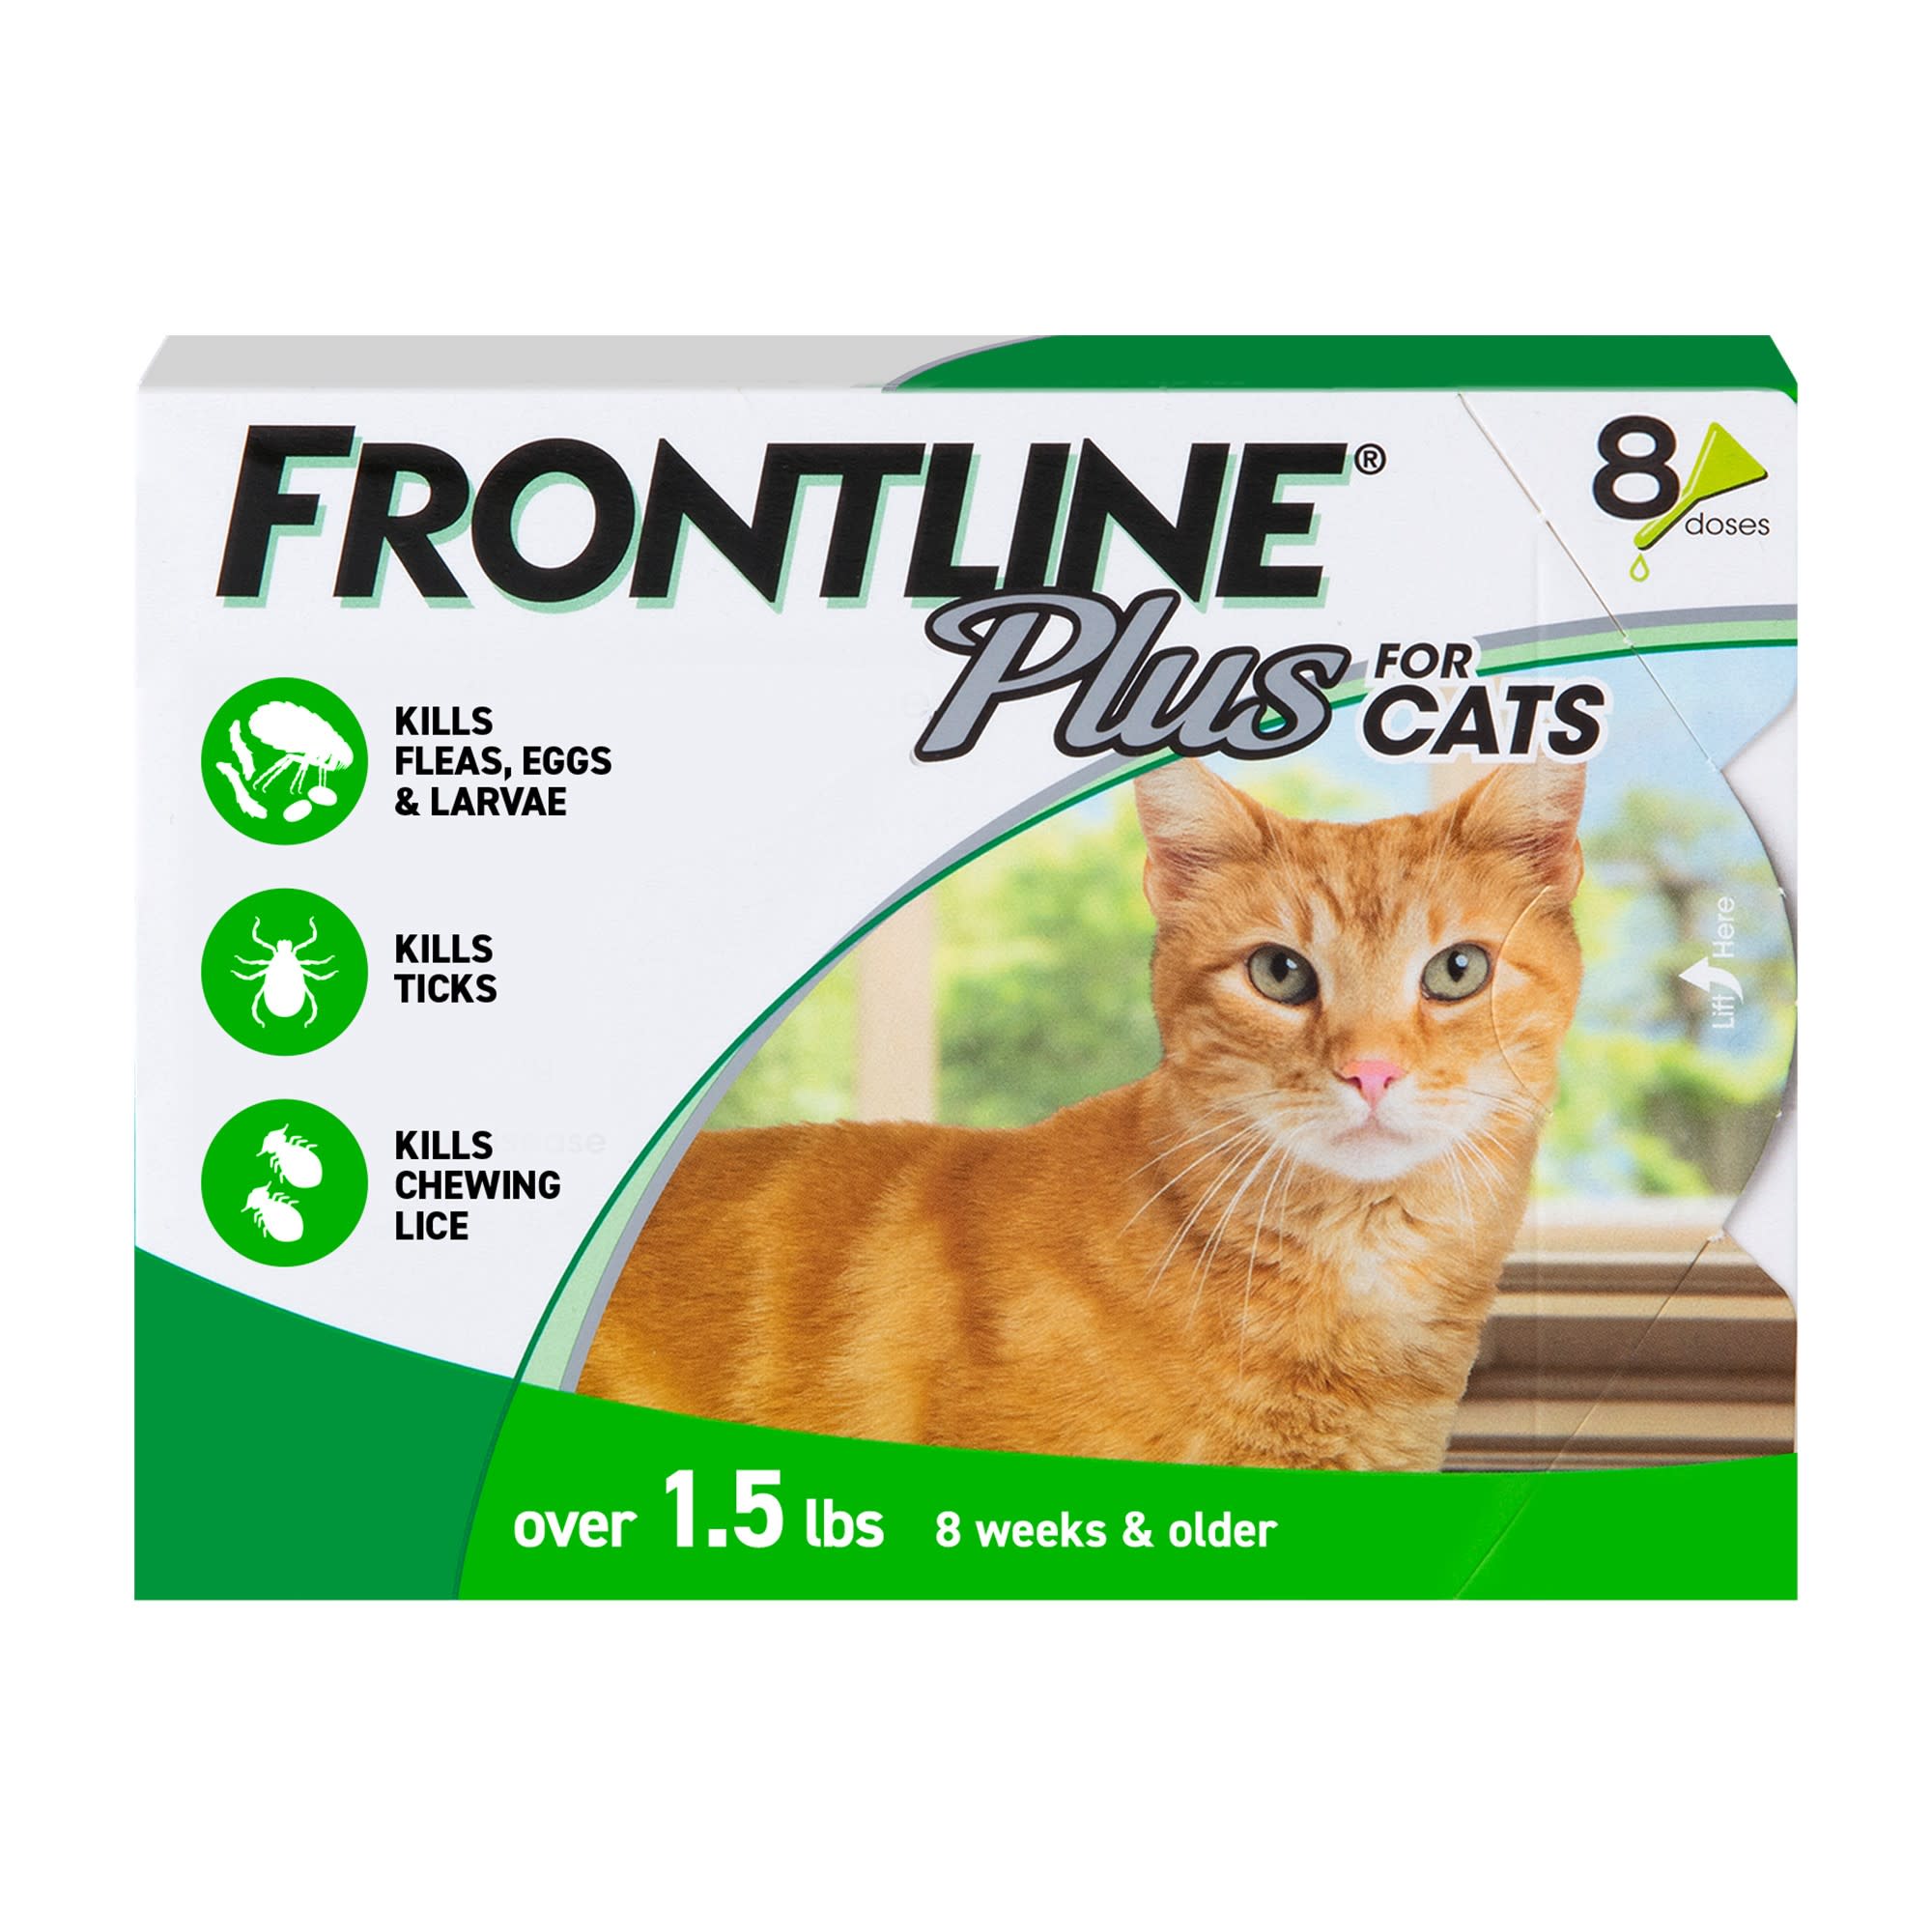 FRONTLINE Plus Flea and Tick Treatment for Cats over 1.5 lbs., 8